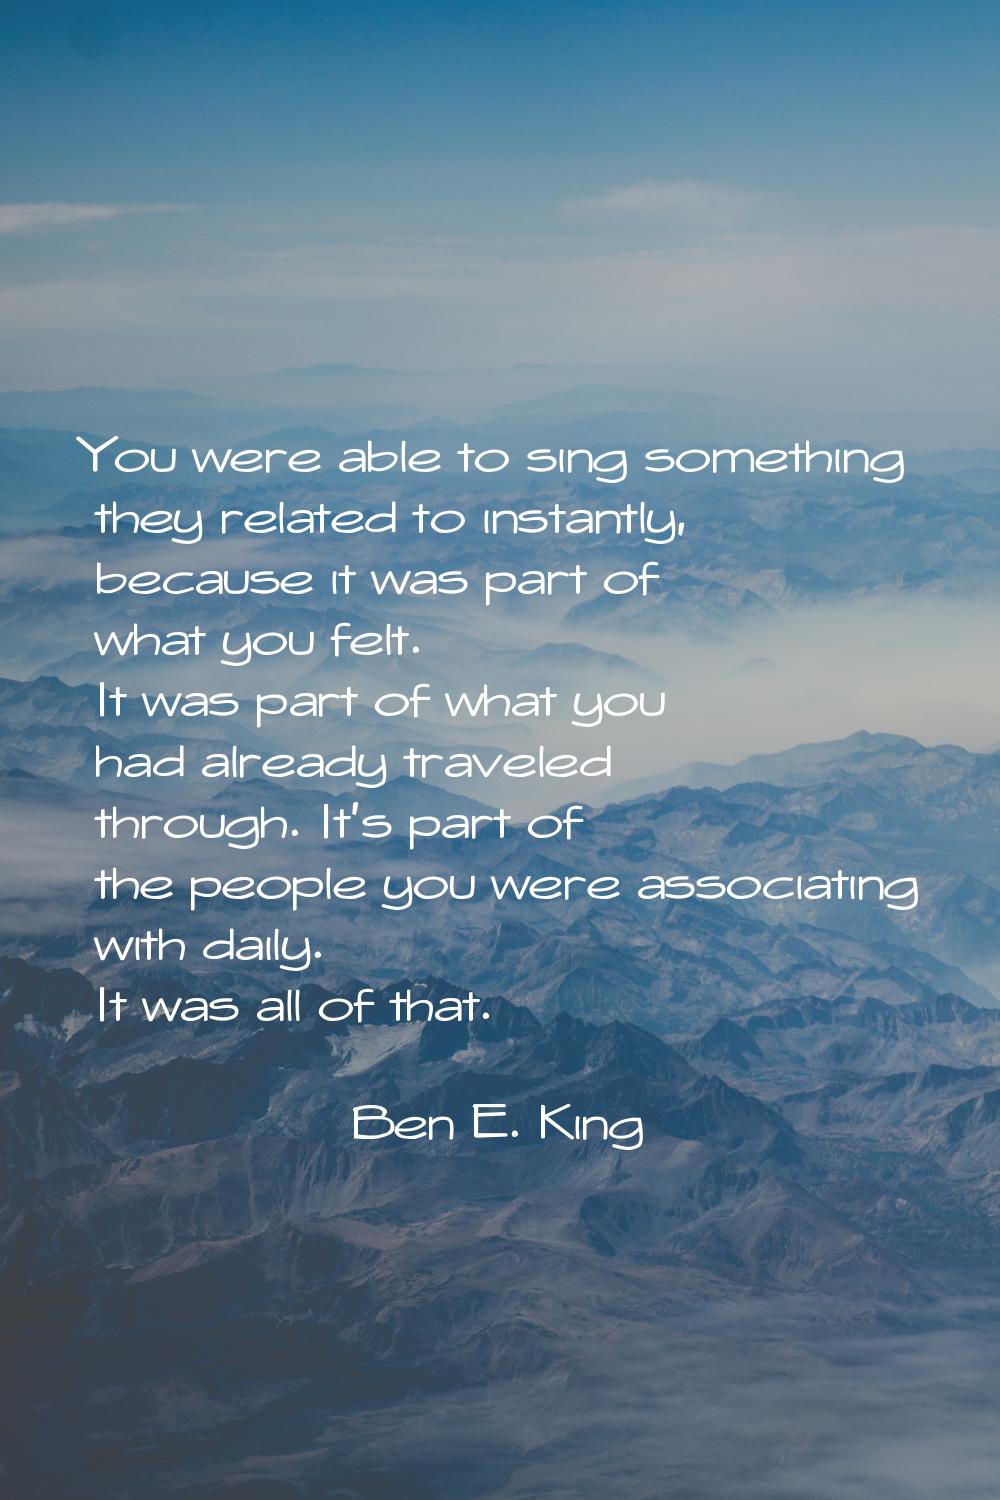 You were able to sing something they related to instantly, because it was part of what you felt. It